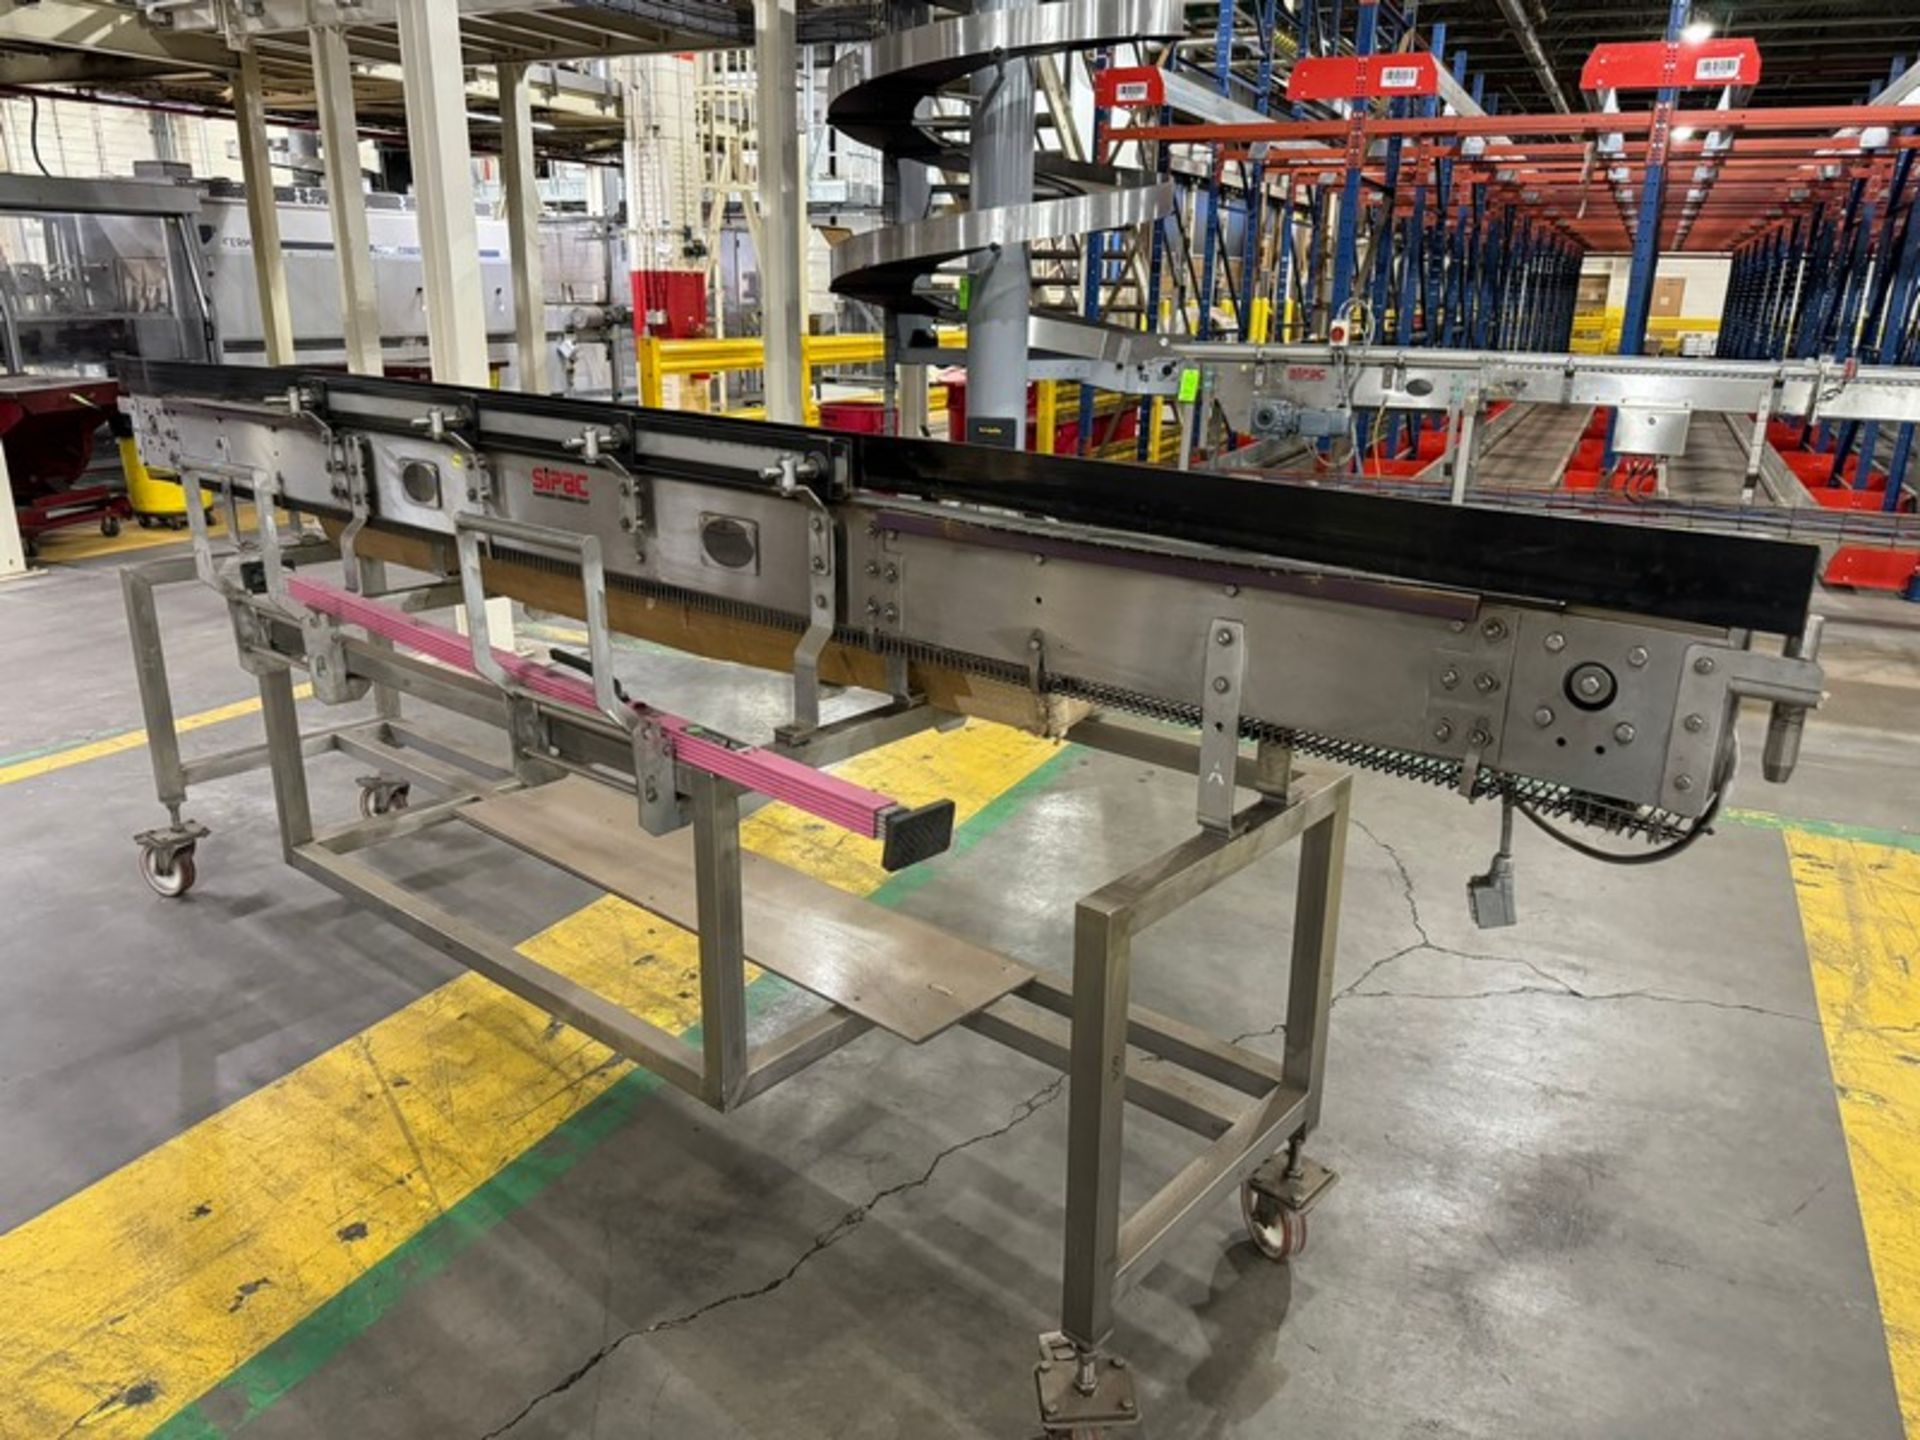 Straight Section of S/S Product Conveyor (LOCATED IN FREEHOLD, N.J.) (Simple Loading Fee $440) - Image 2 of 2